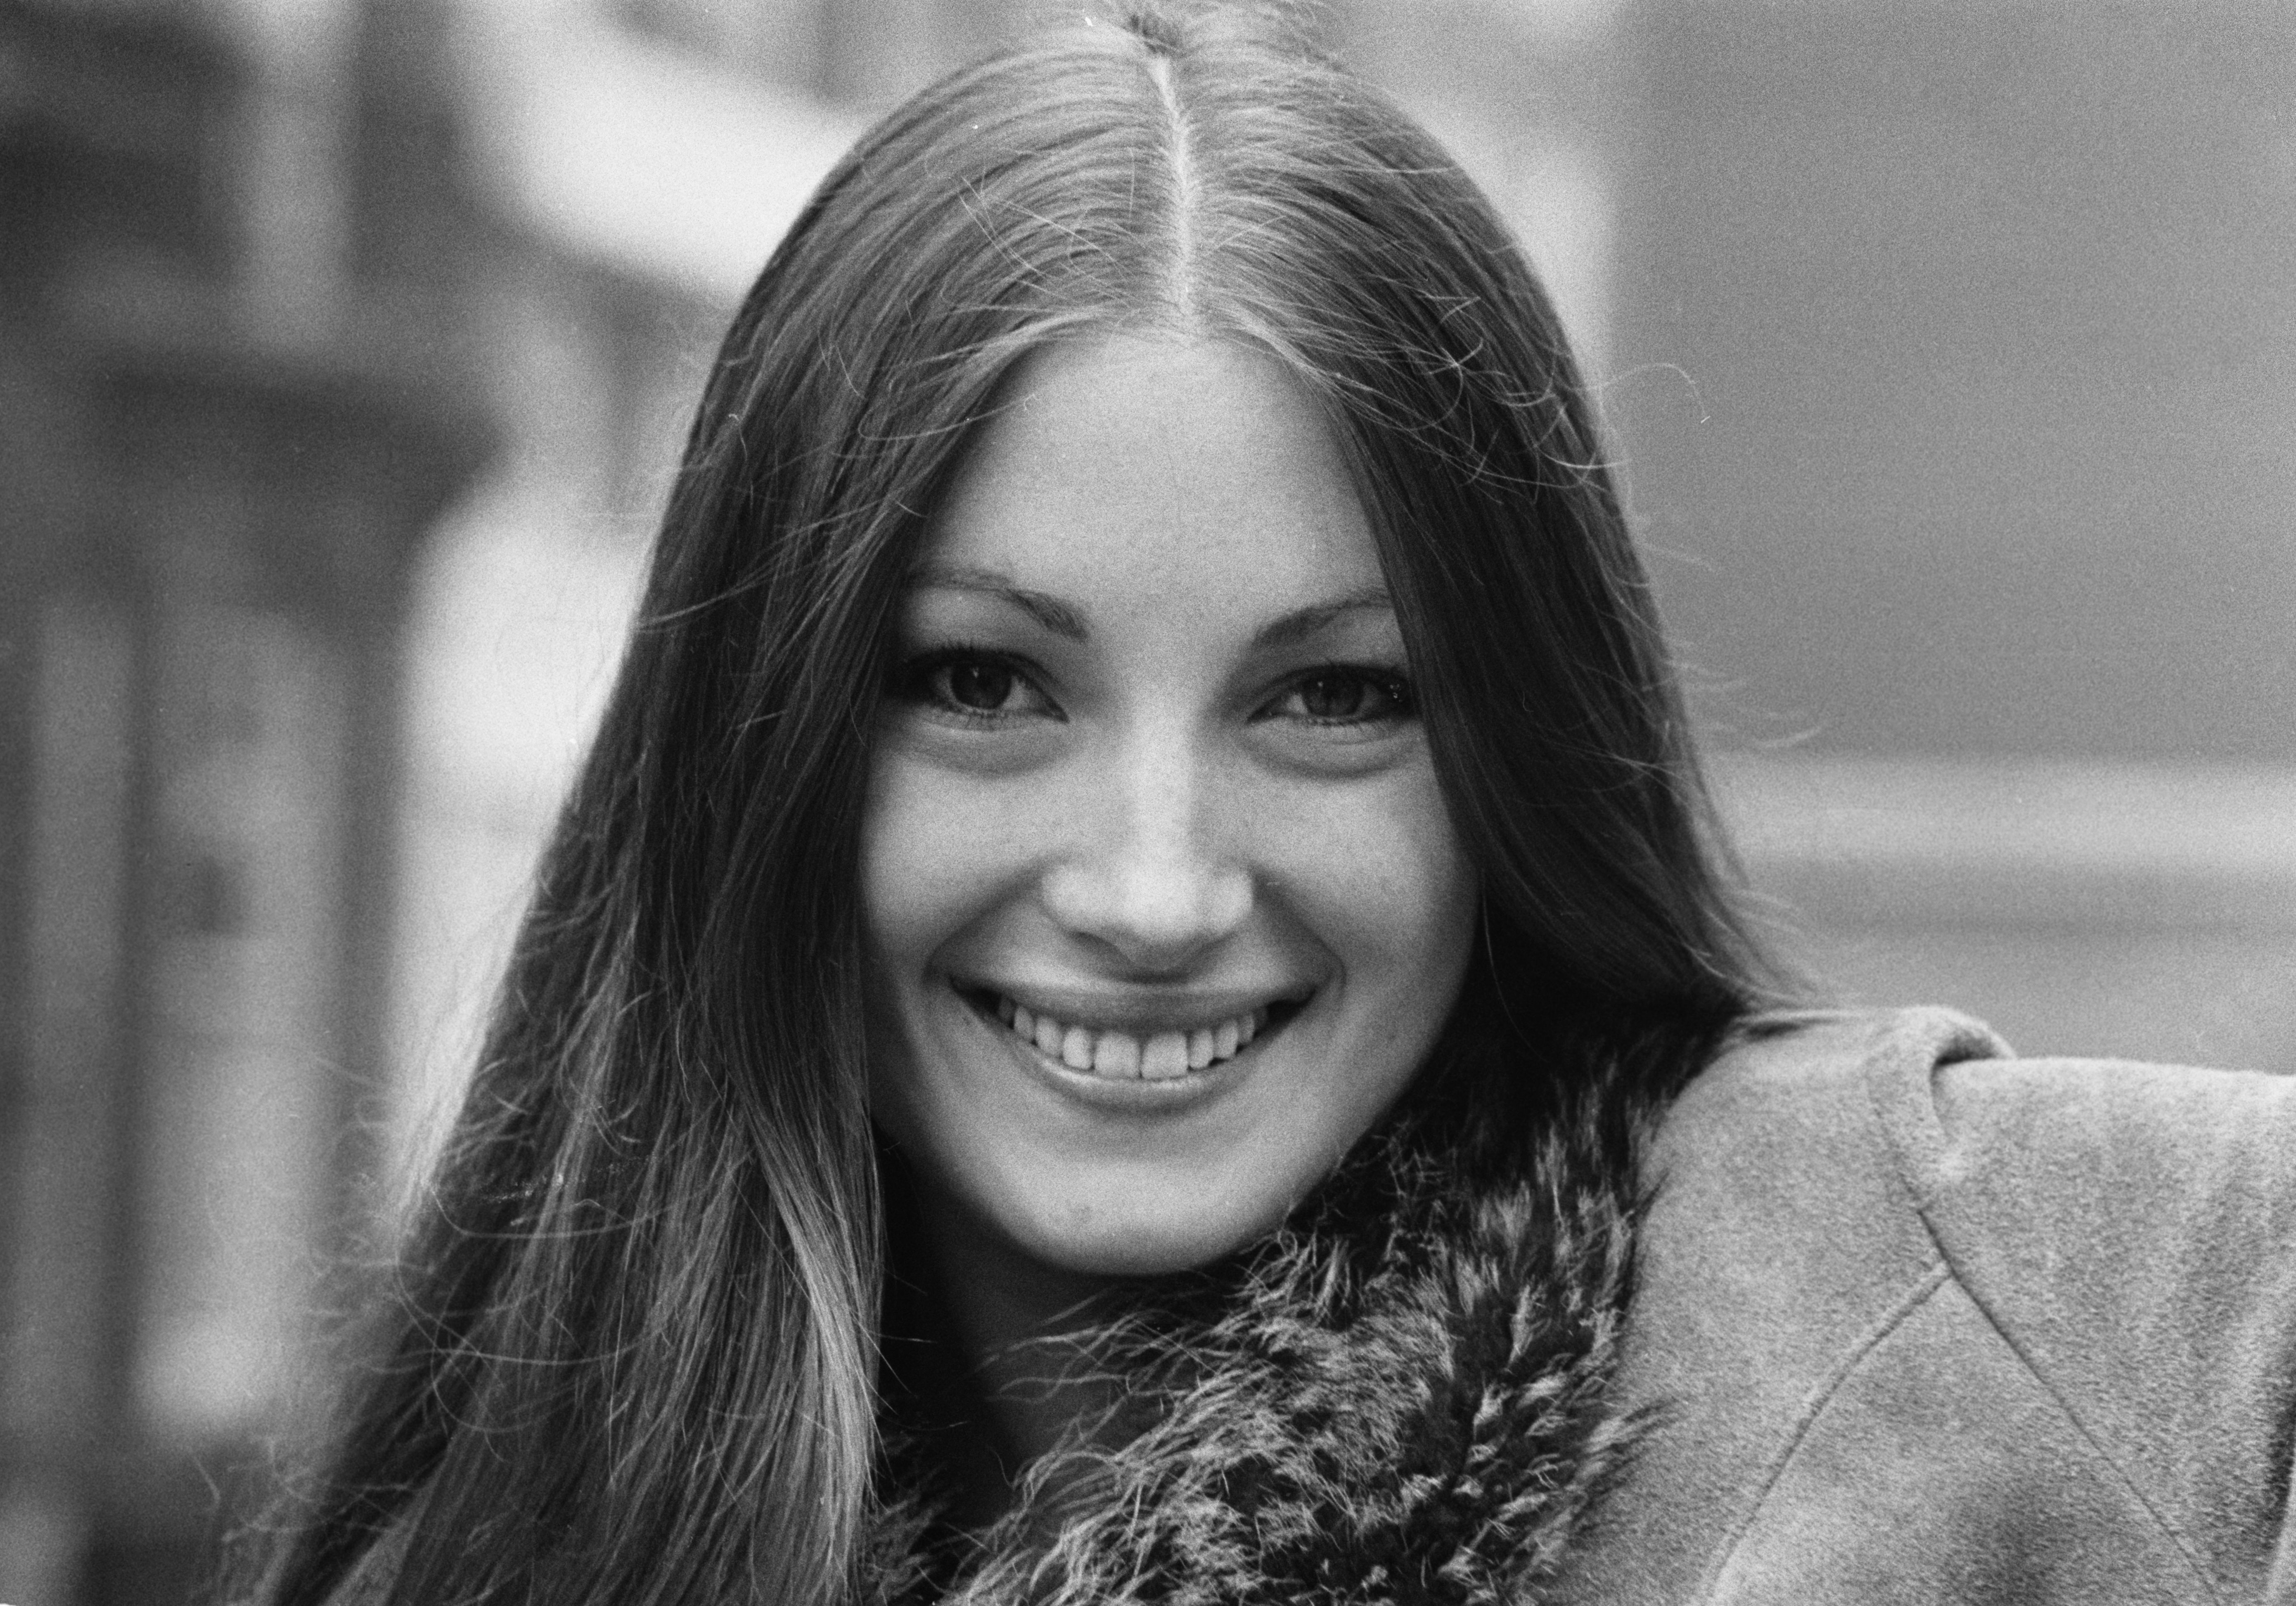 Jane Seymour, set to appear in the James Bond film, "Live and Let Die," posing in the United Kingdom on October 11, 1972. | Source: Evening Standard/Hulton Archive/Getty Images